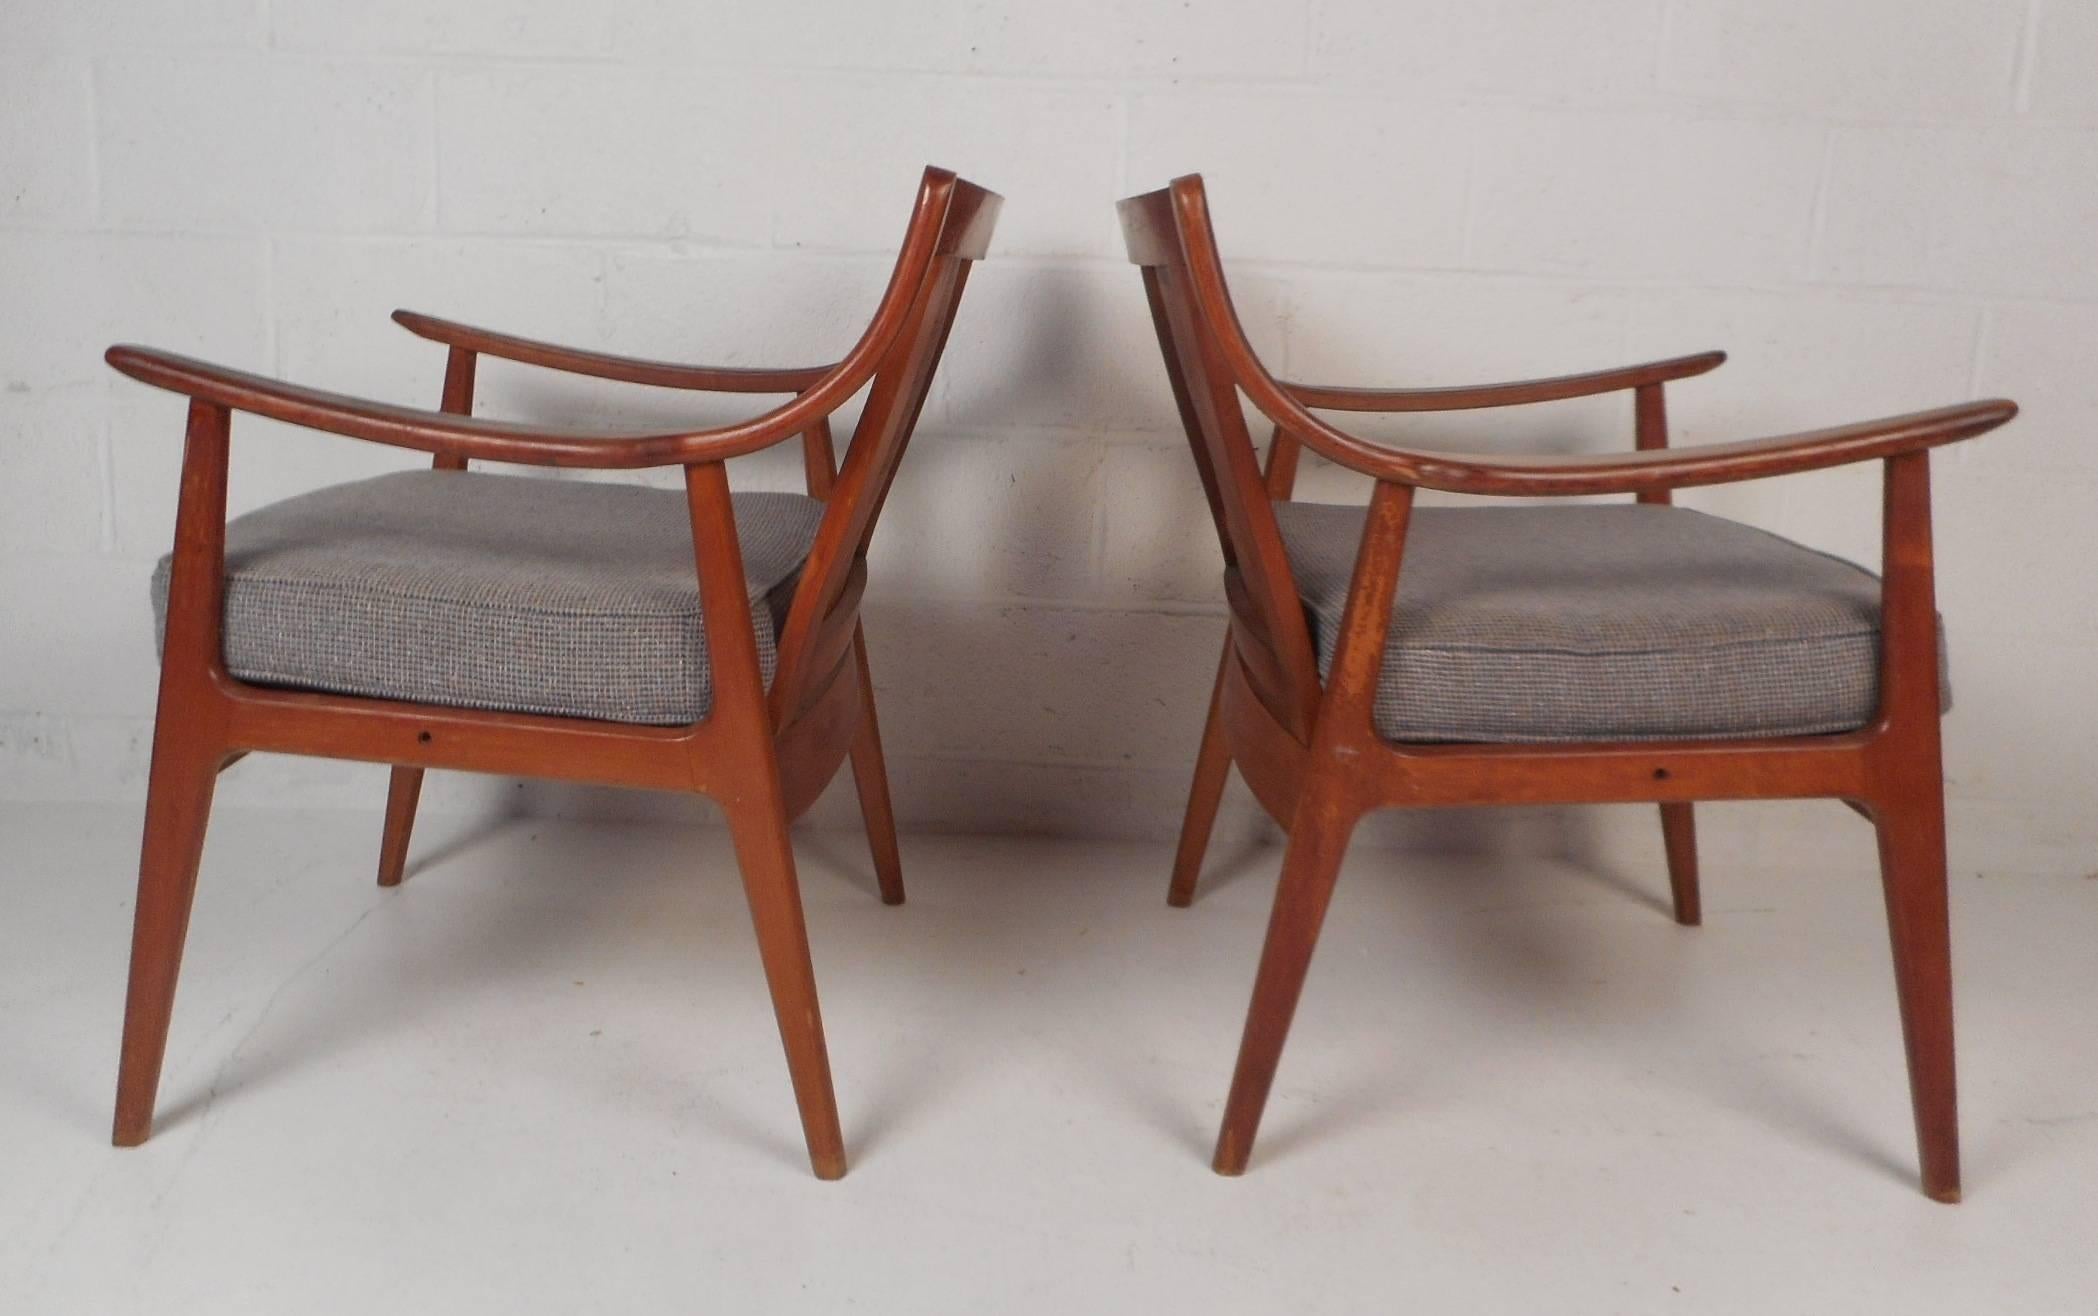 Late 20th Century Mid-Century Modern Armchairs with Cane Back Rests